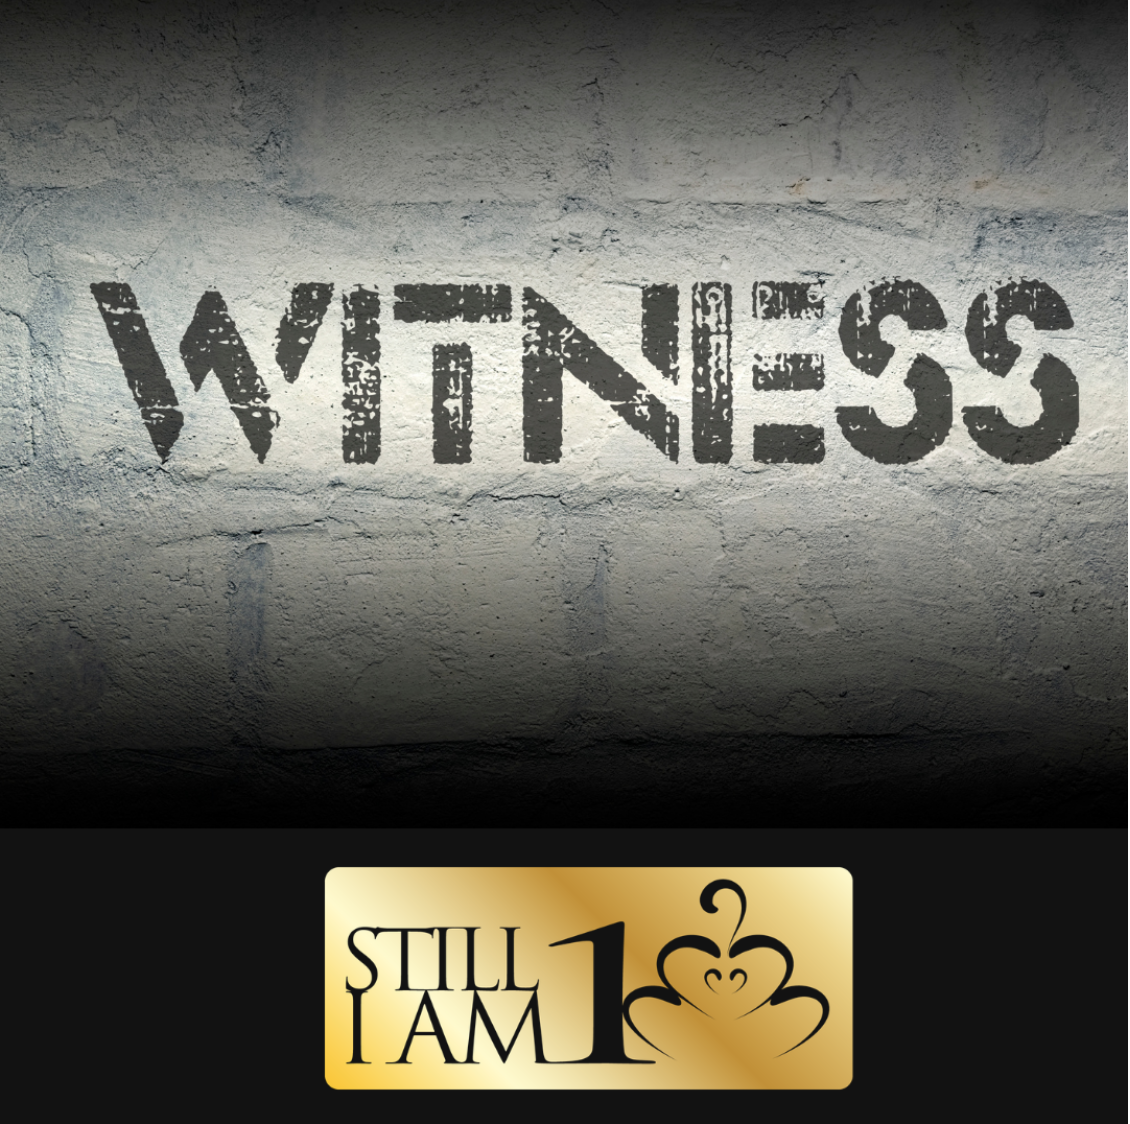 image with the word "witness" stencilled on a brick wall